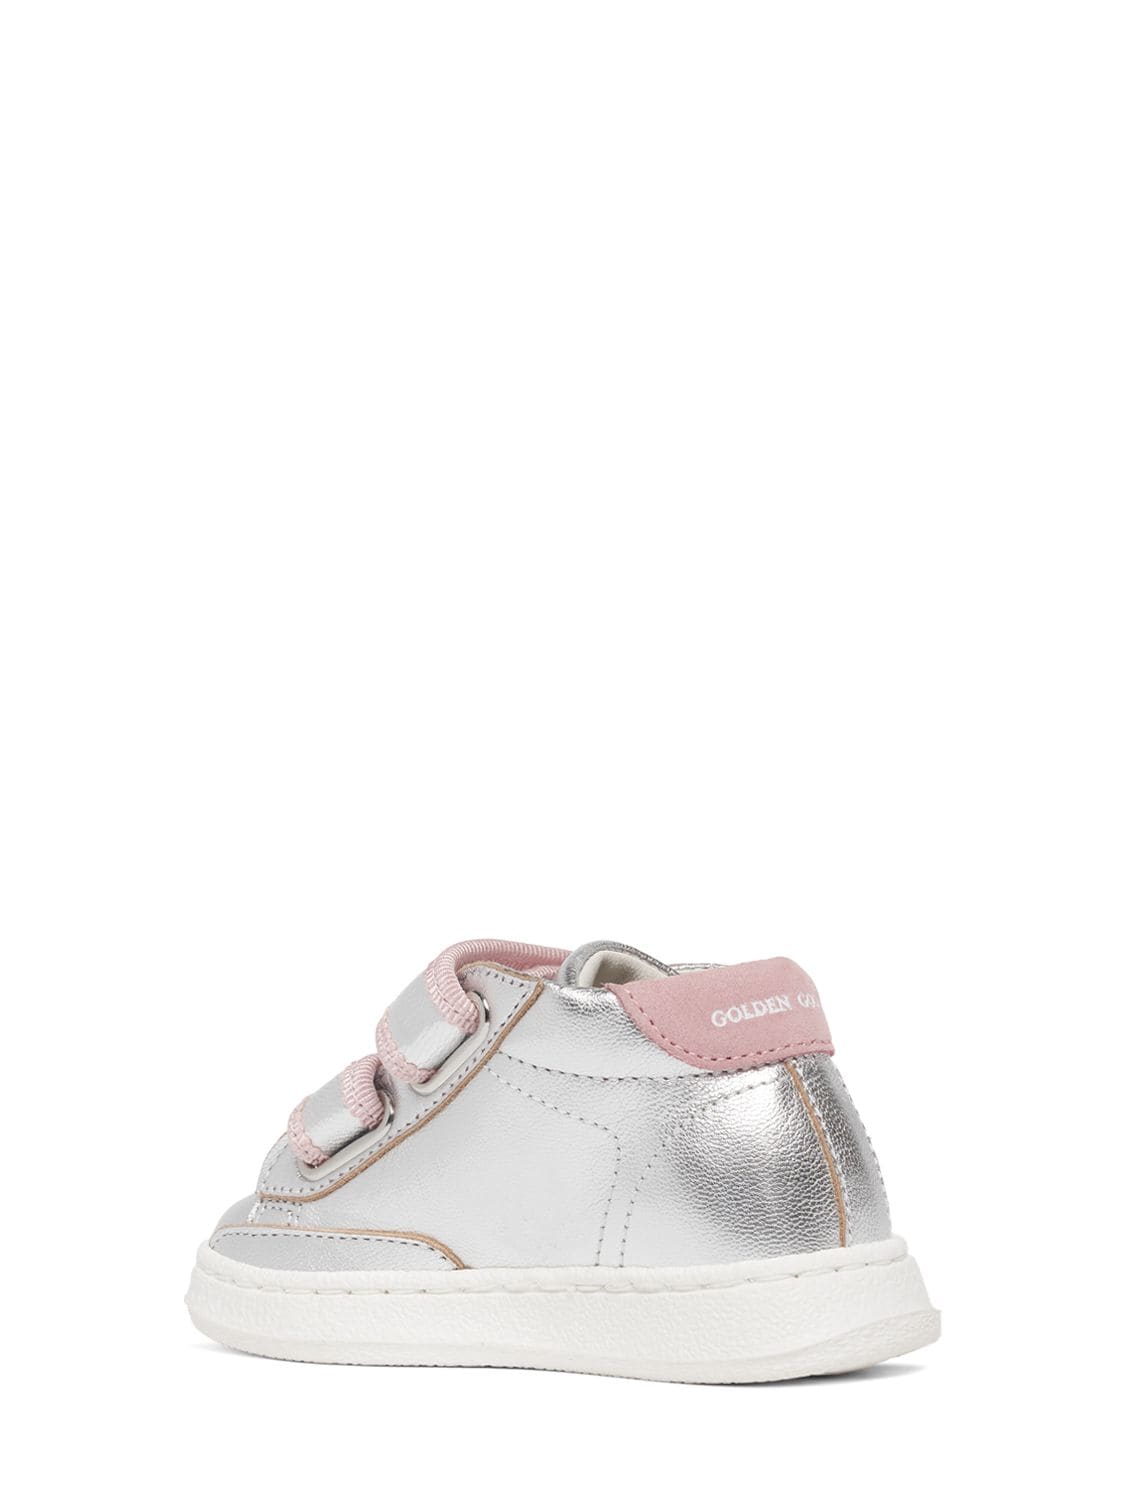 Shop Golden Goose June Laminated Strap Sneakers In Silver,pink